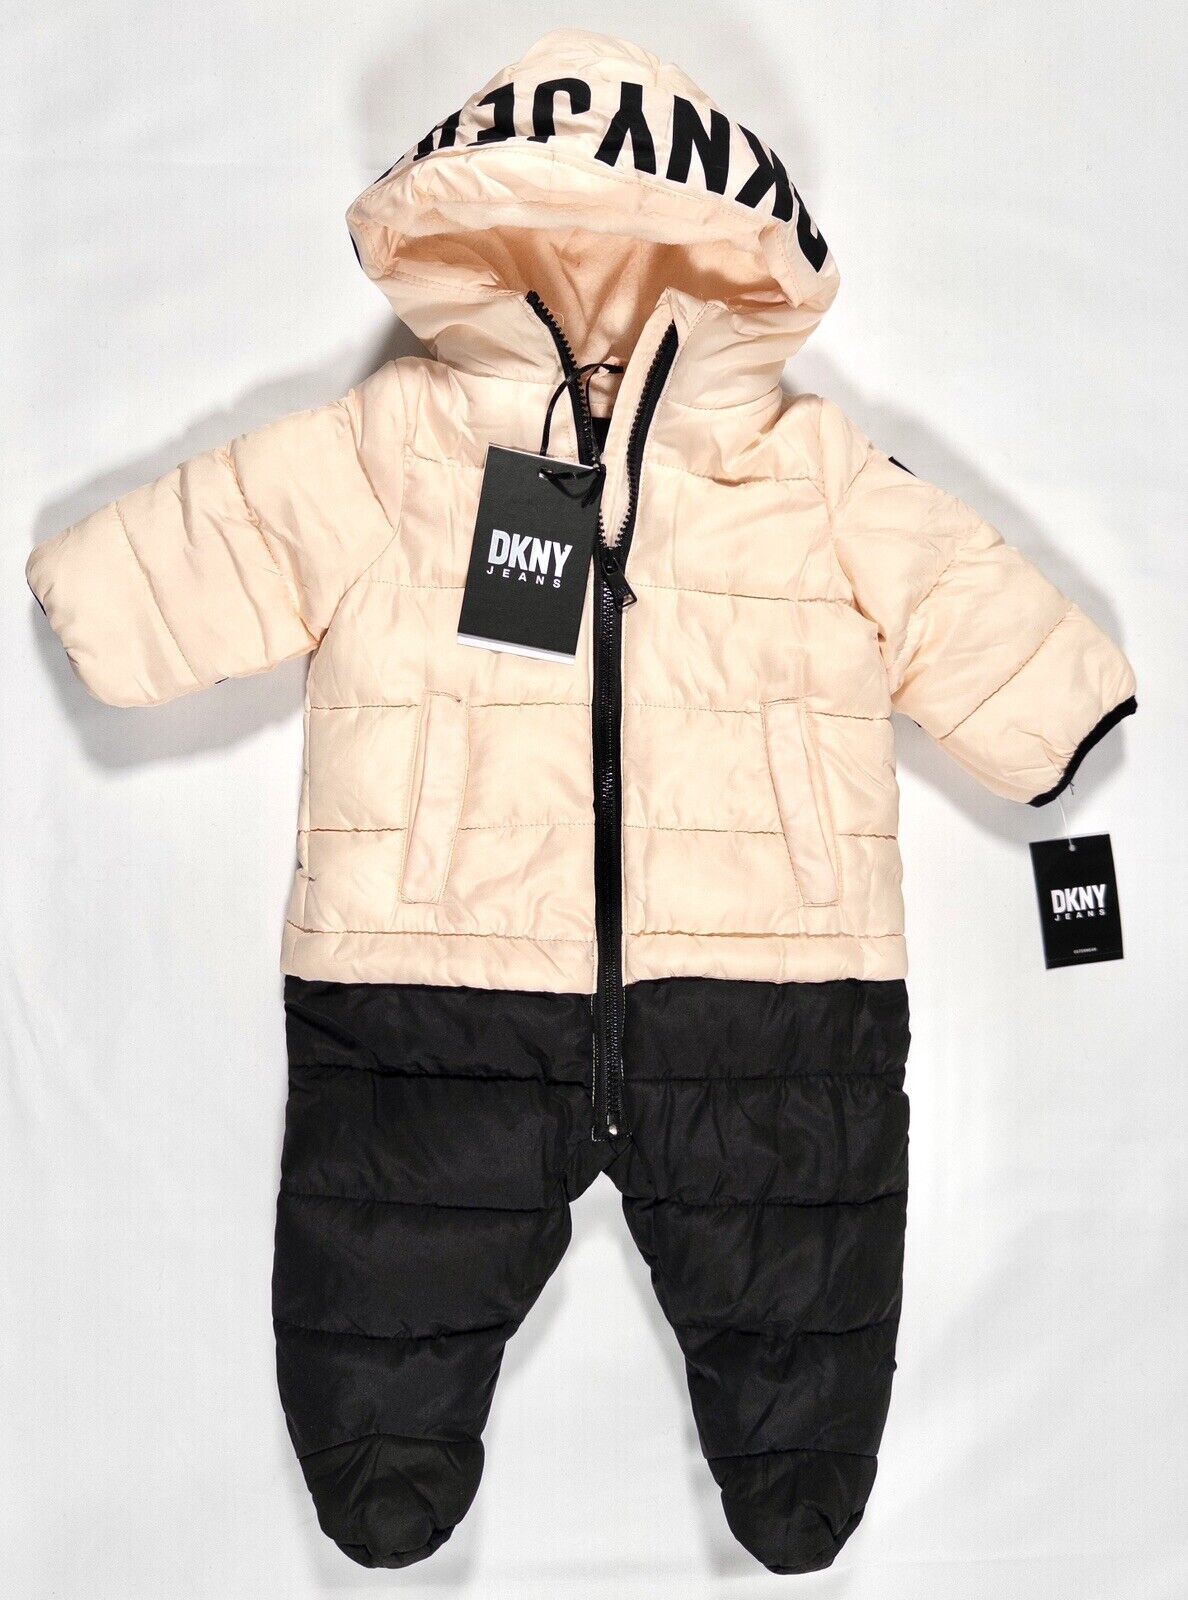 DKNY JEANS Baby Girls All in one Snowsuit Pink Black Size UK 6-9 Months